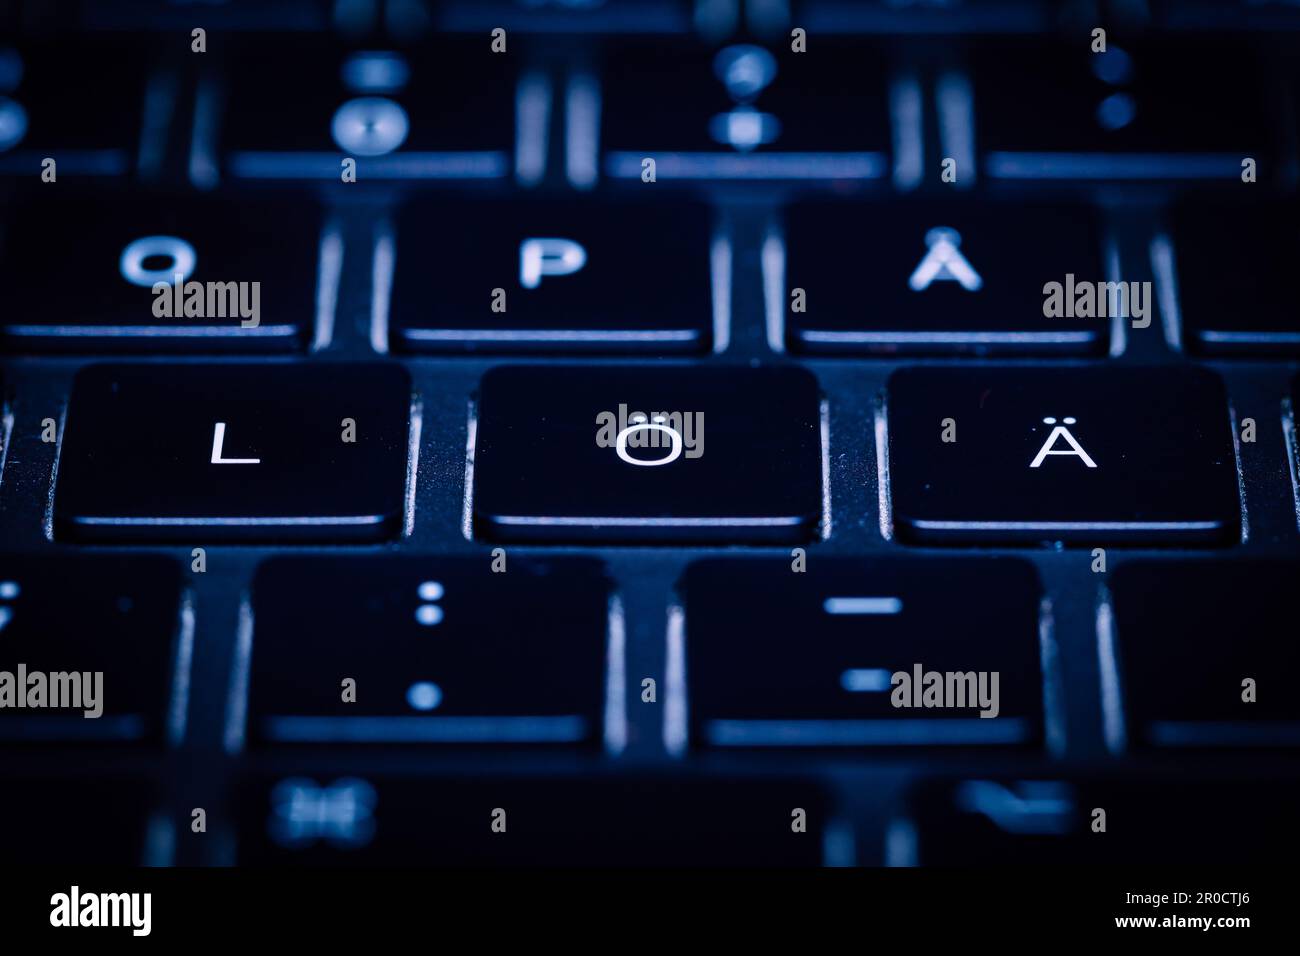 Swedish language keyboard with white lettering, keys and their corresponding characters Stock Photo